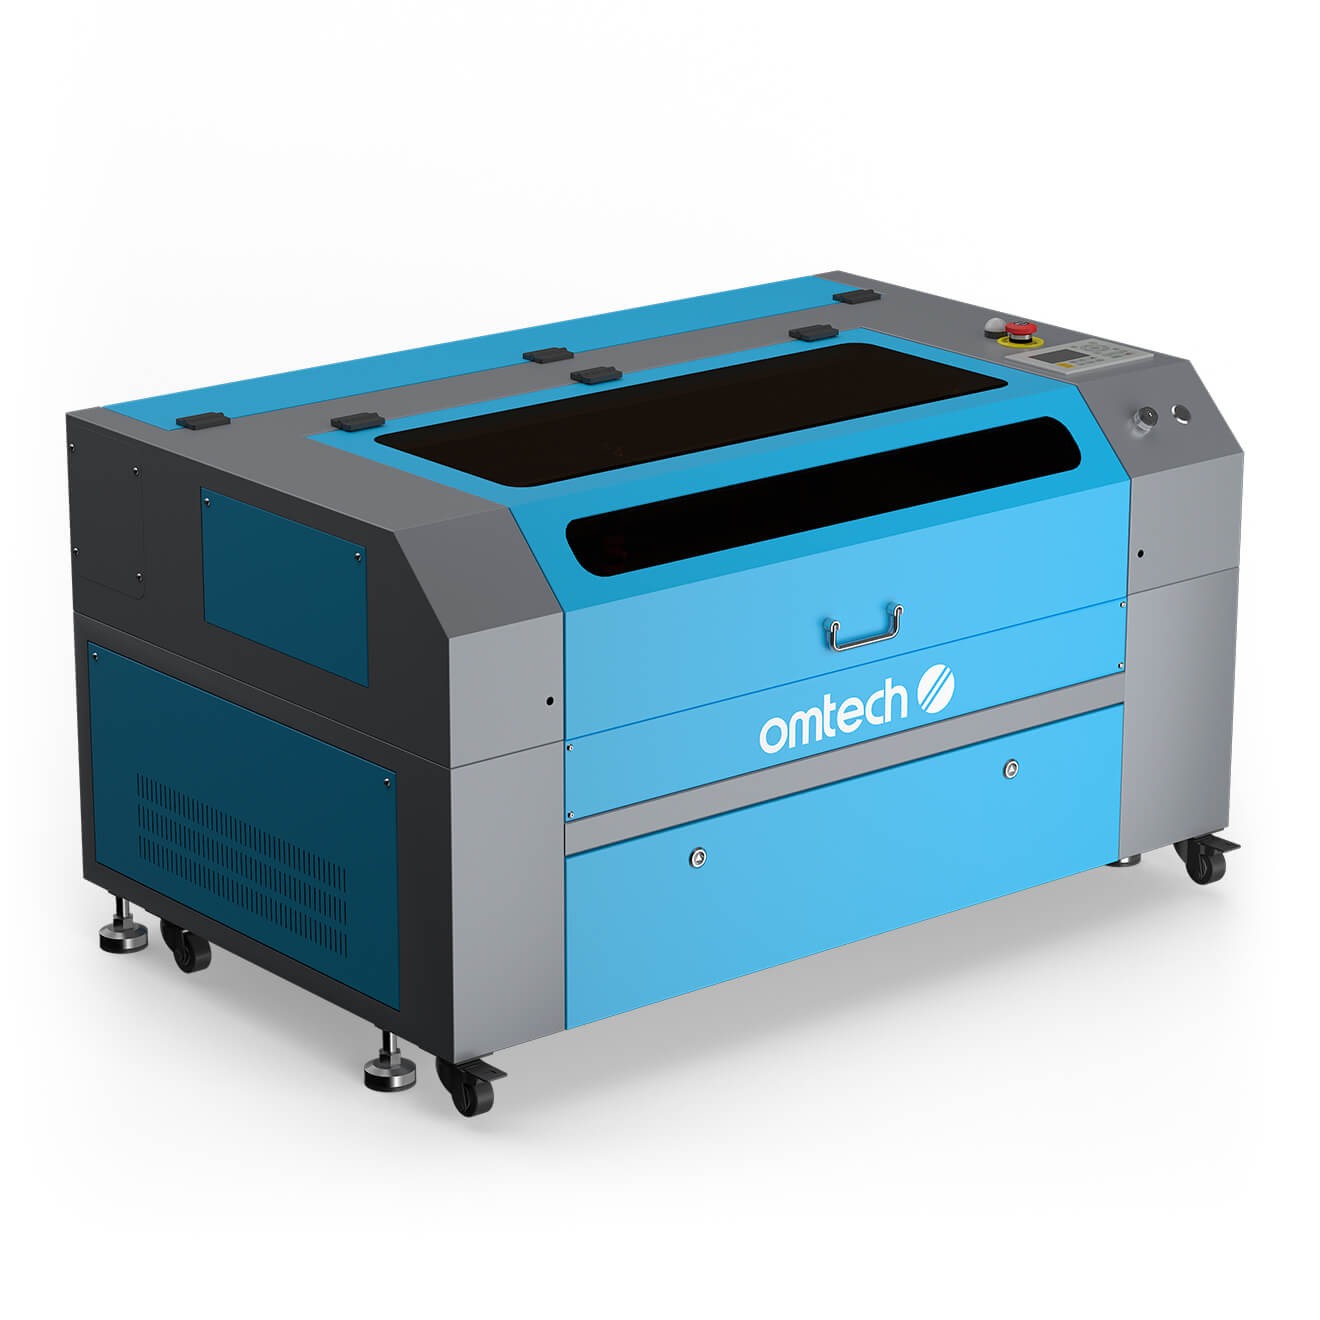 70W CO2 Laser Engraving Machine & Cutter with 750 x 400mm Engraving Area | Turbo-747